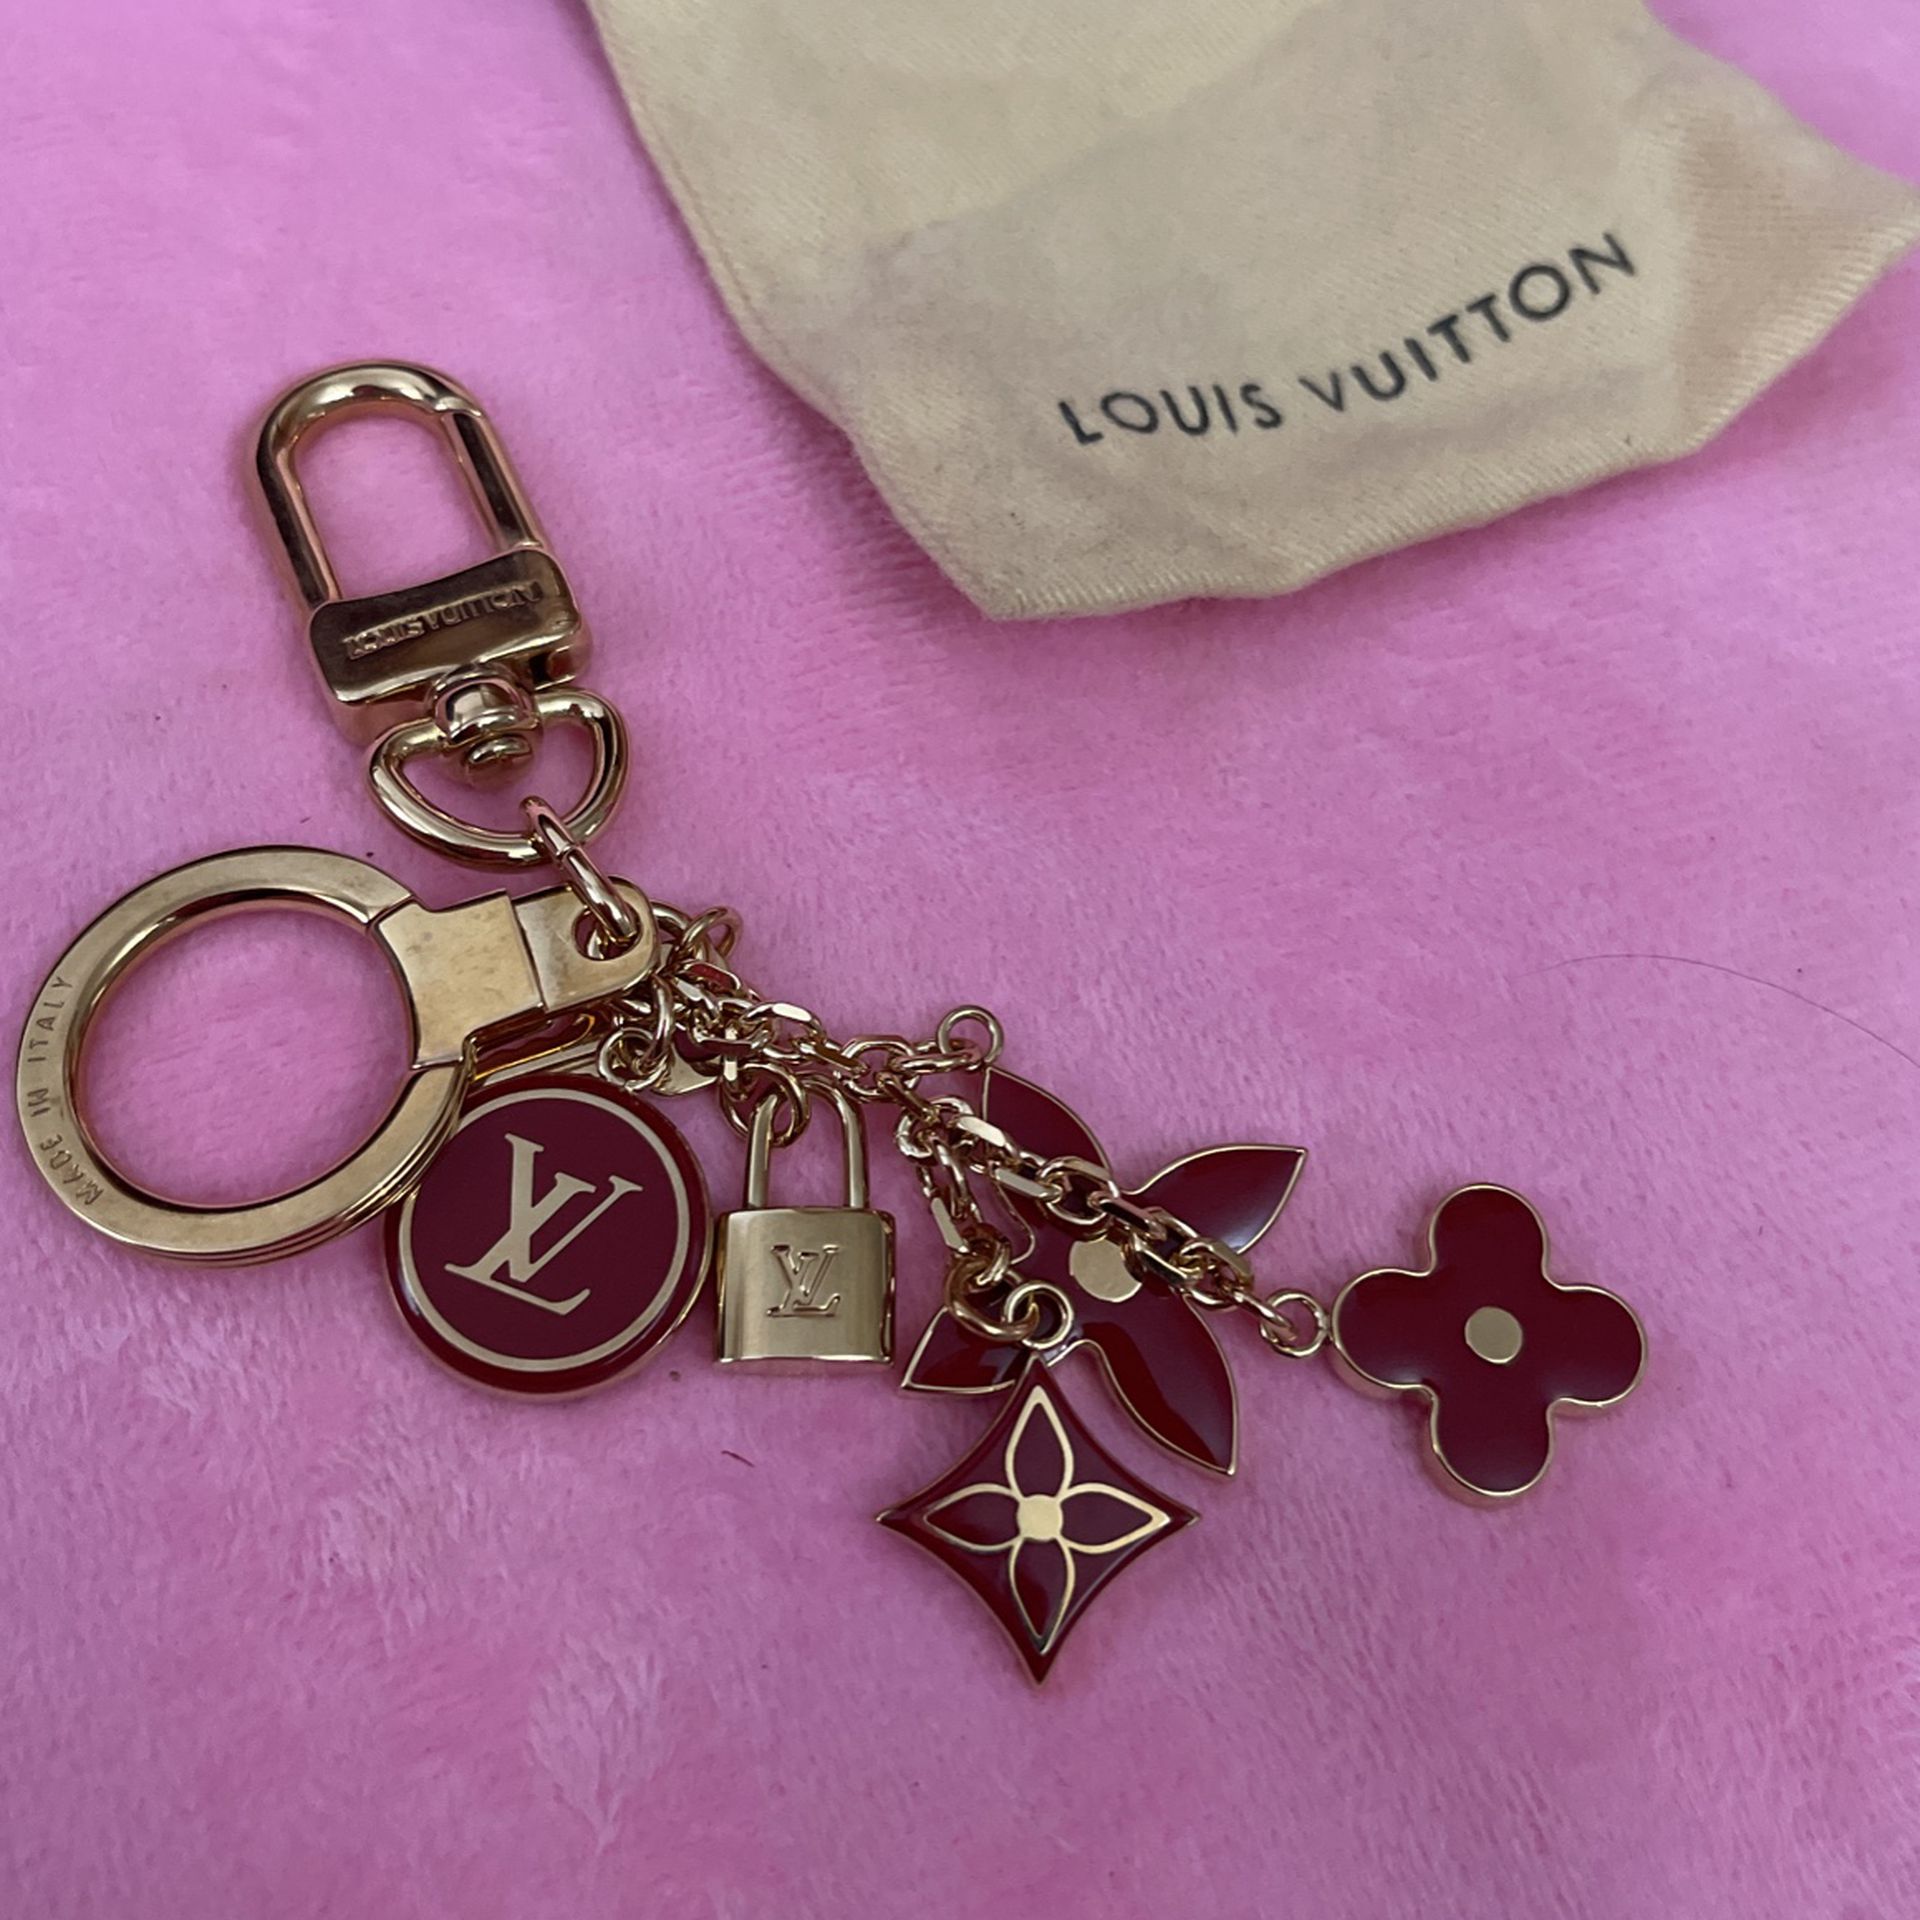 Authentic Louis Vuitton Bag Charm And Keyring for Sale in Hoboken